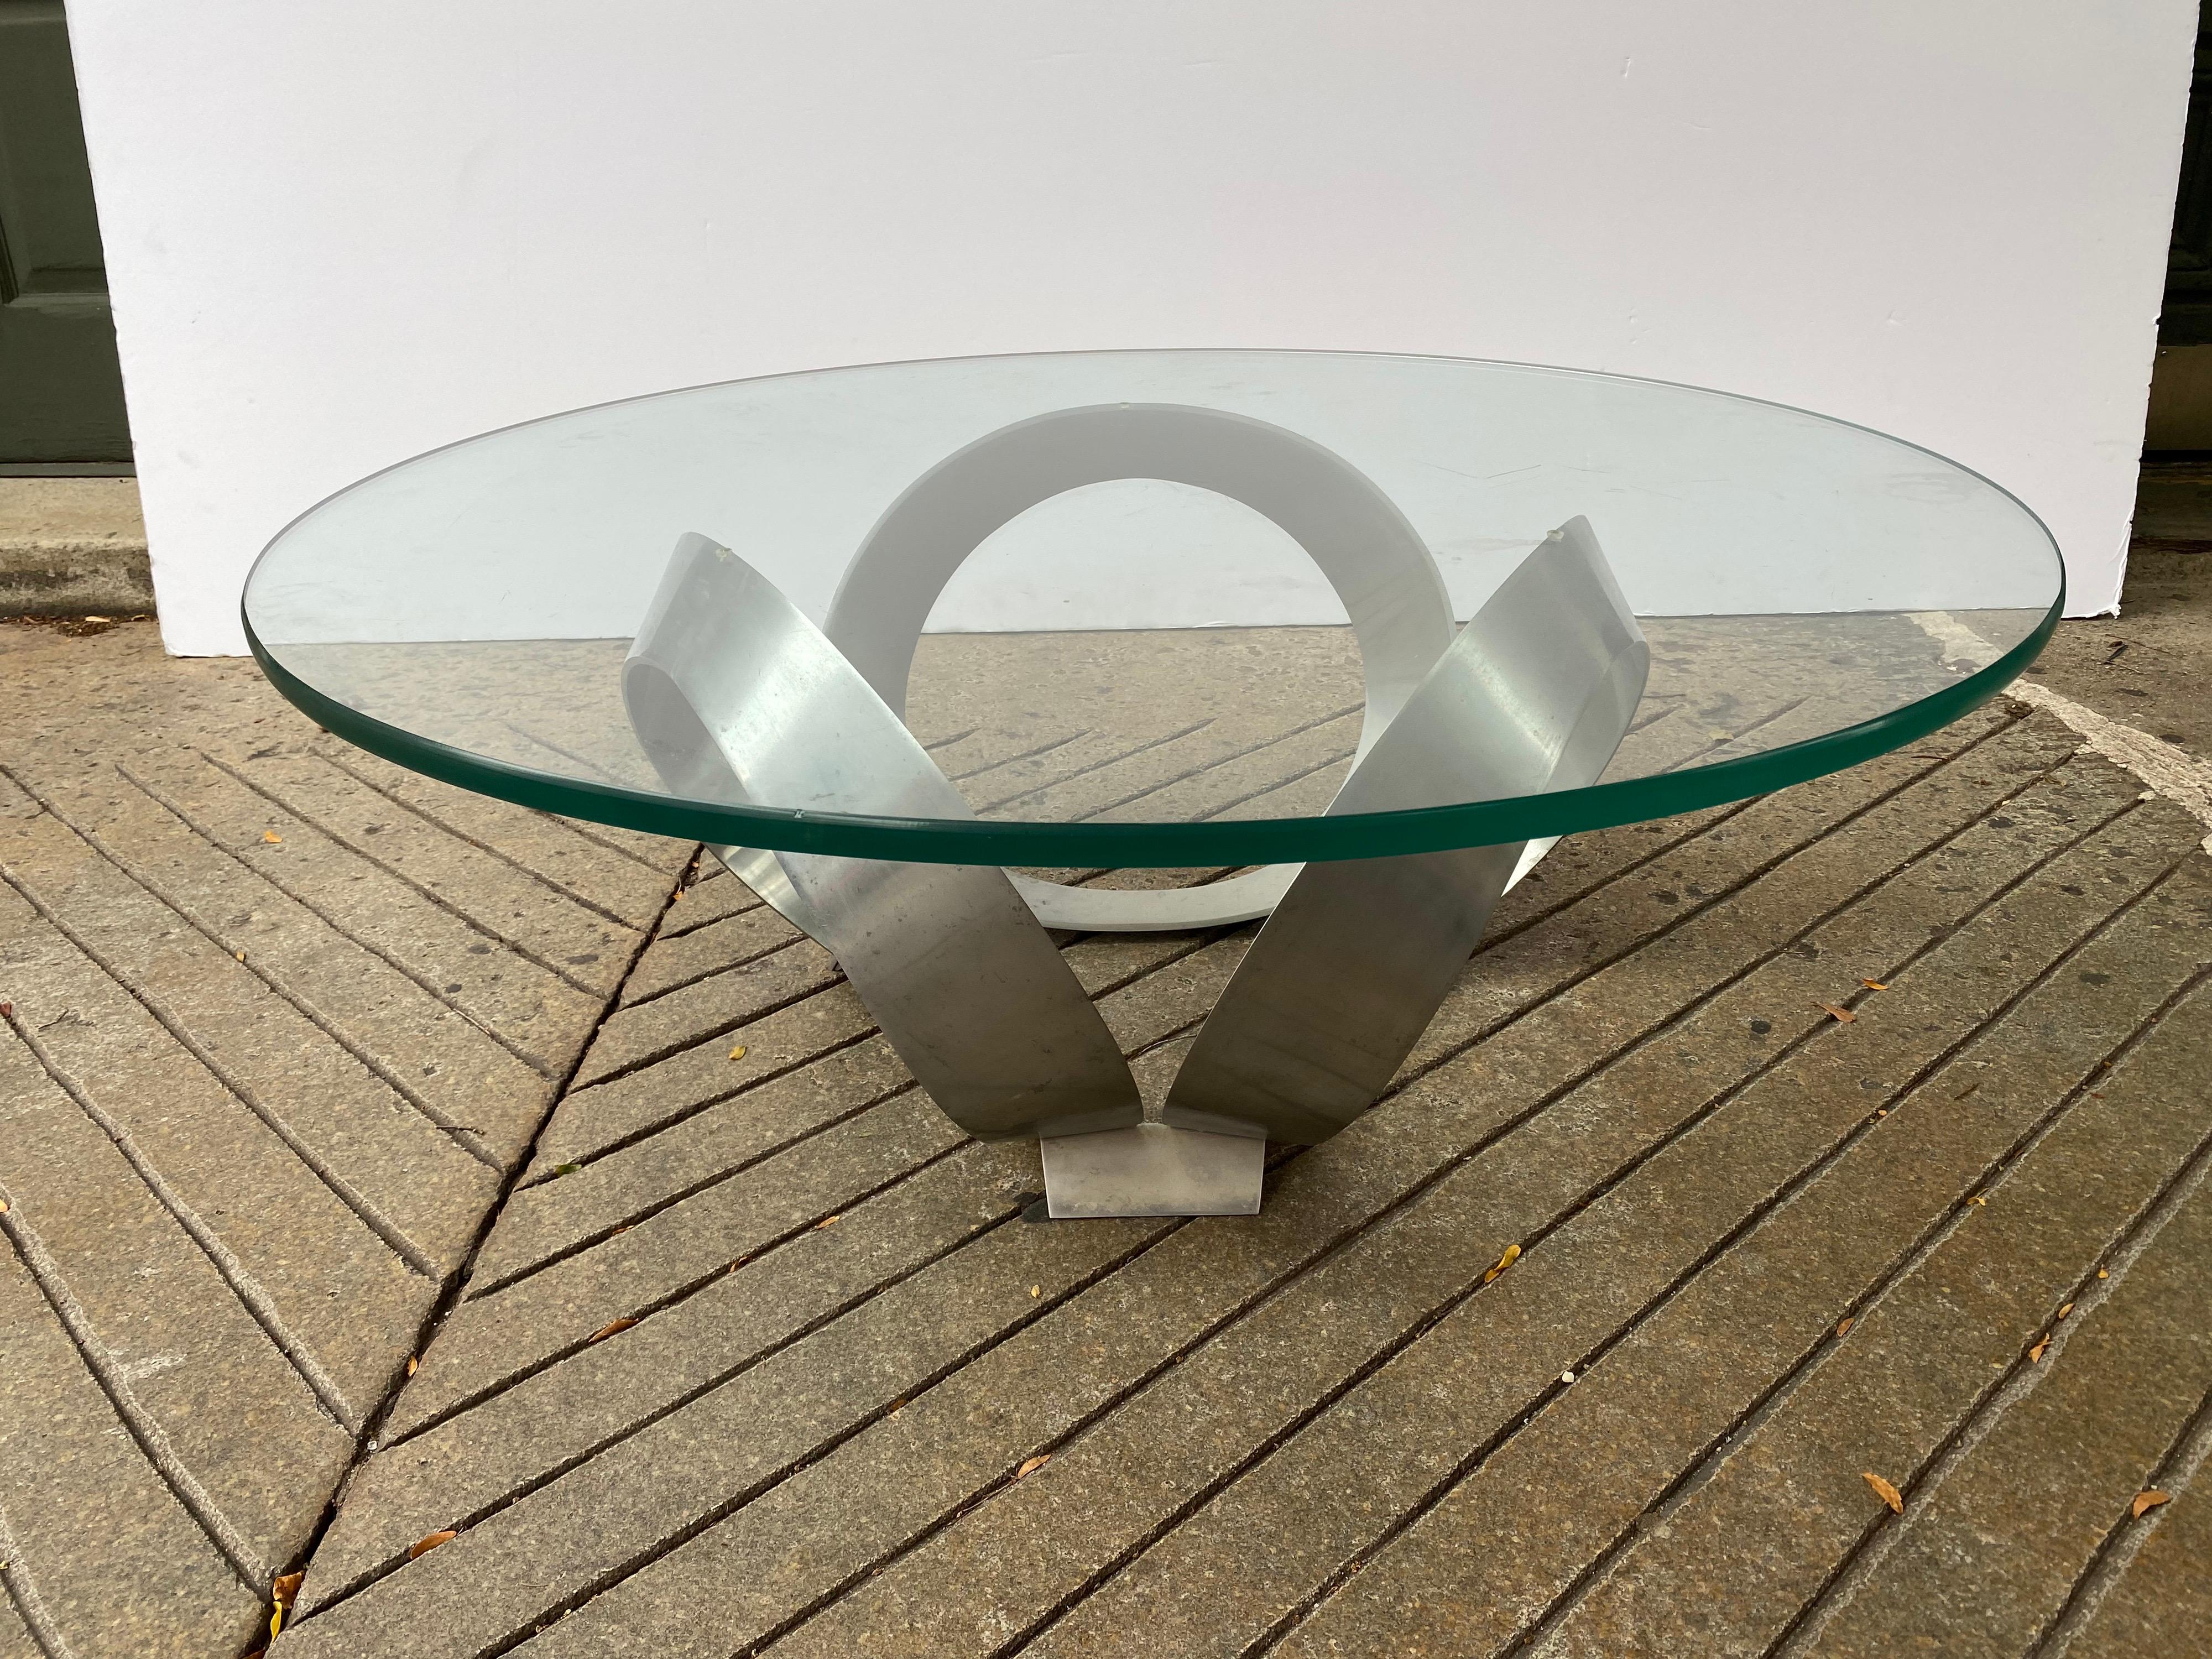 Knut Hesterberg 1970's aluminum and glass round coffee table. 3 substantial aluminum rings hold up a 43